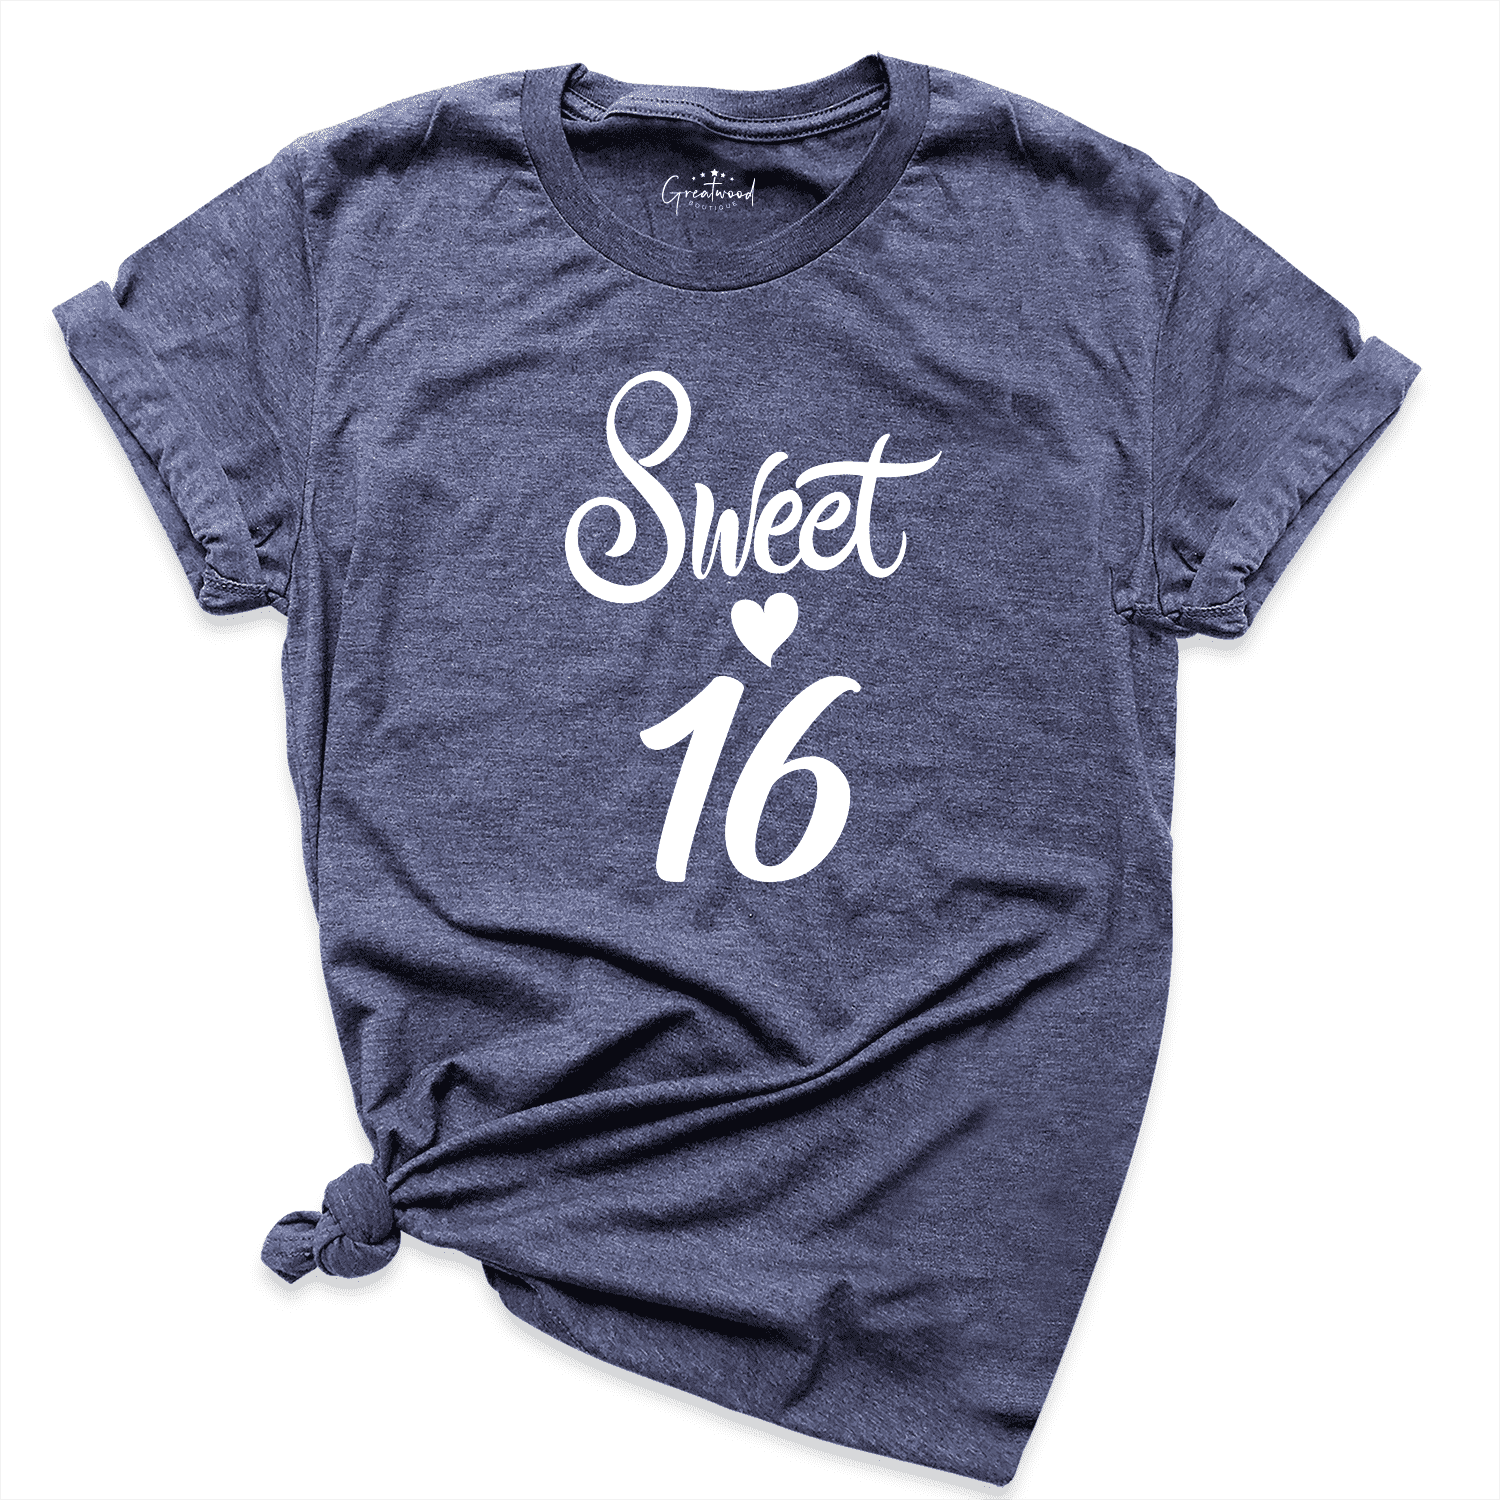 Sweet 16th Shirt Navy - Greatwood Boutique 